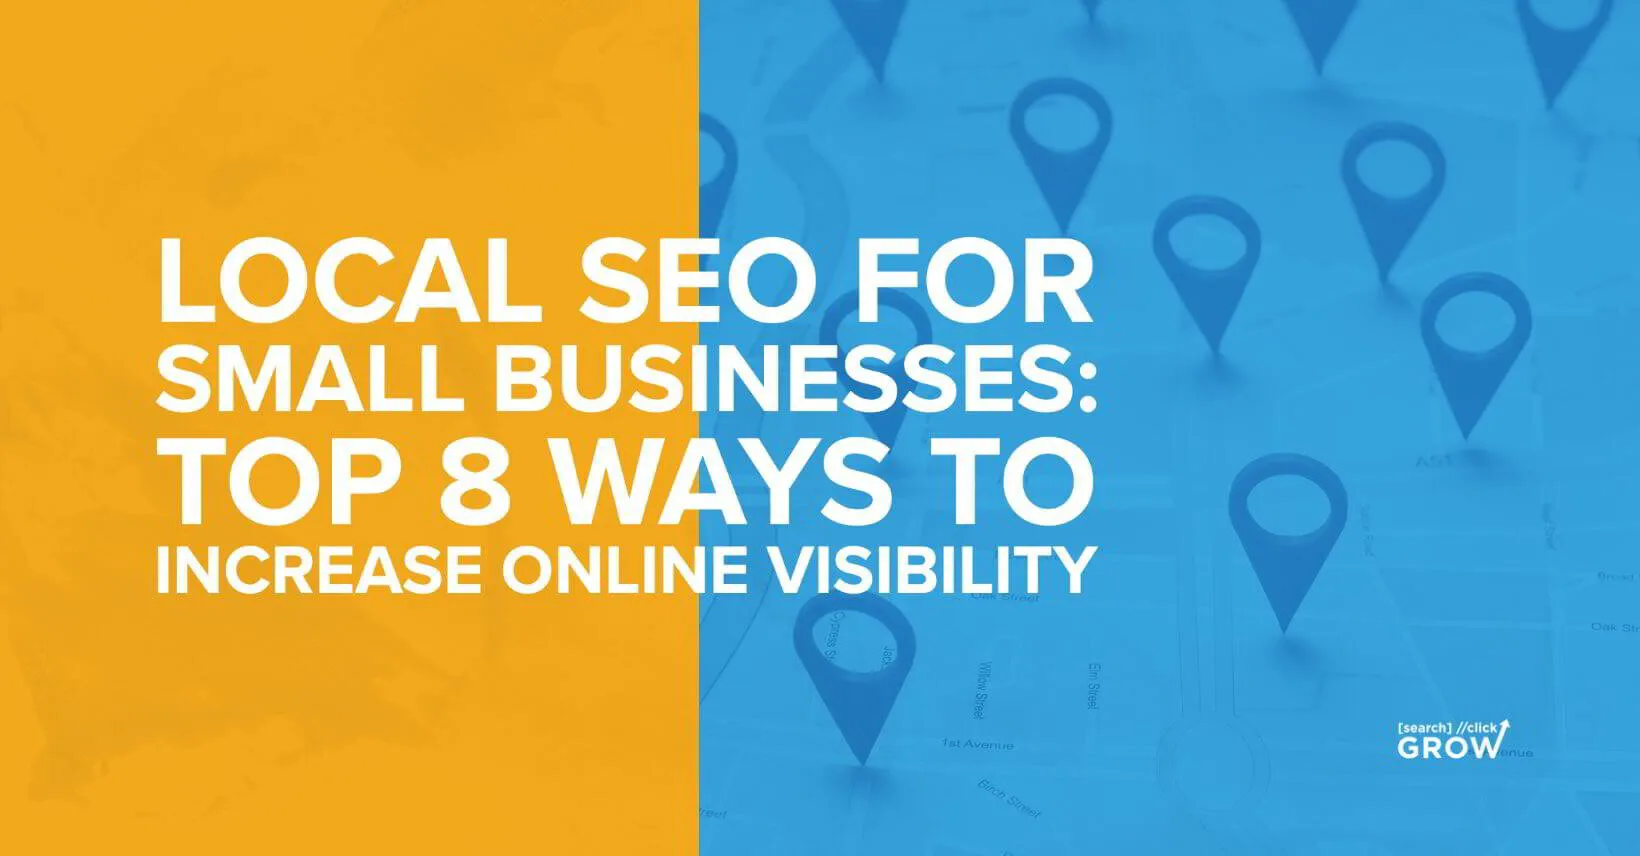 Local SEO for Small Businesses: Top 8 Ways to Increase Online Visibility